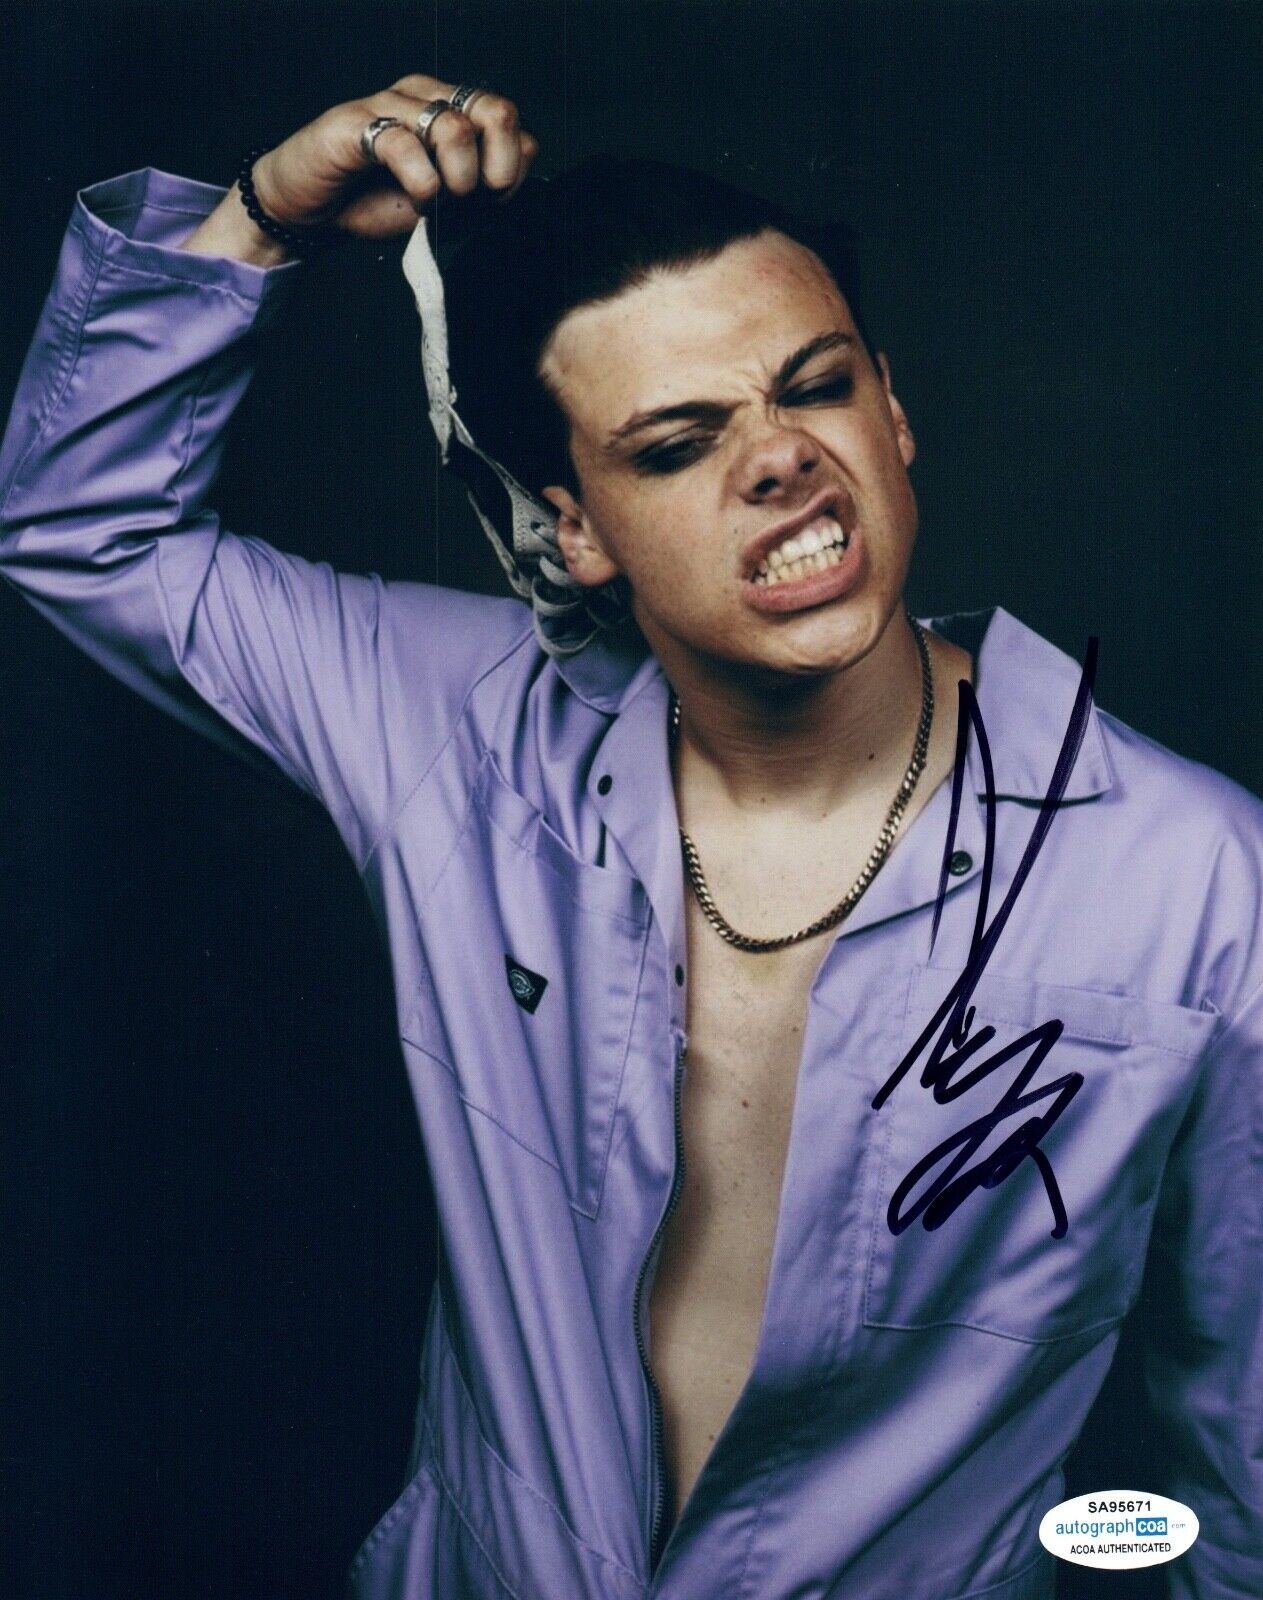 Yungblud Signed Autographed 8x10 Photo Poster painting ACOA COA